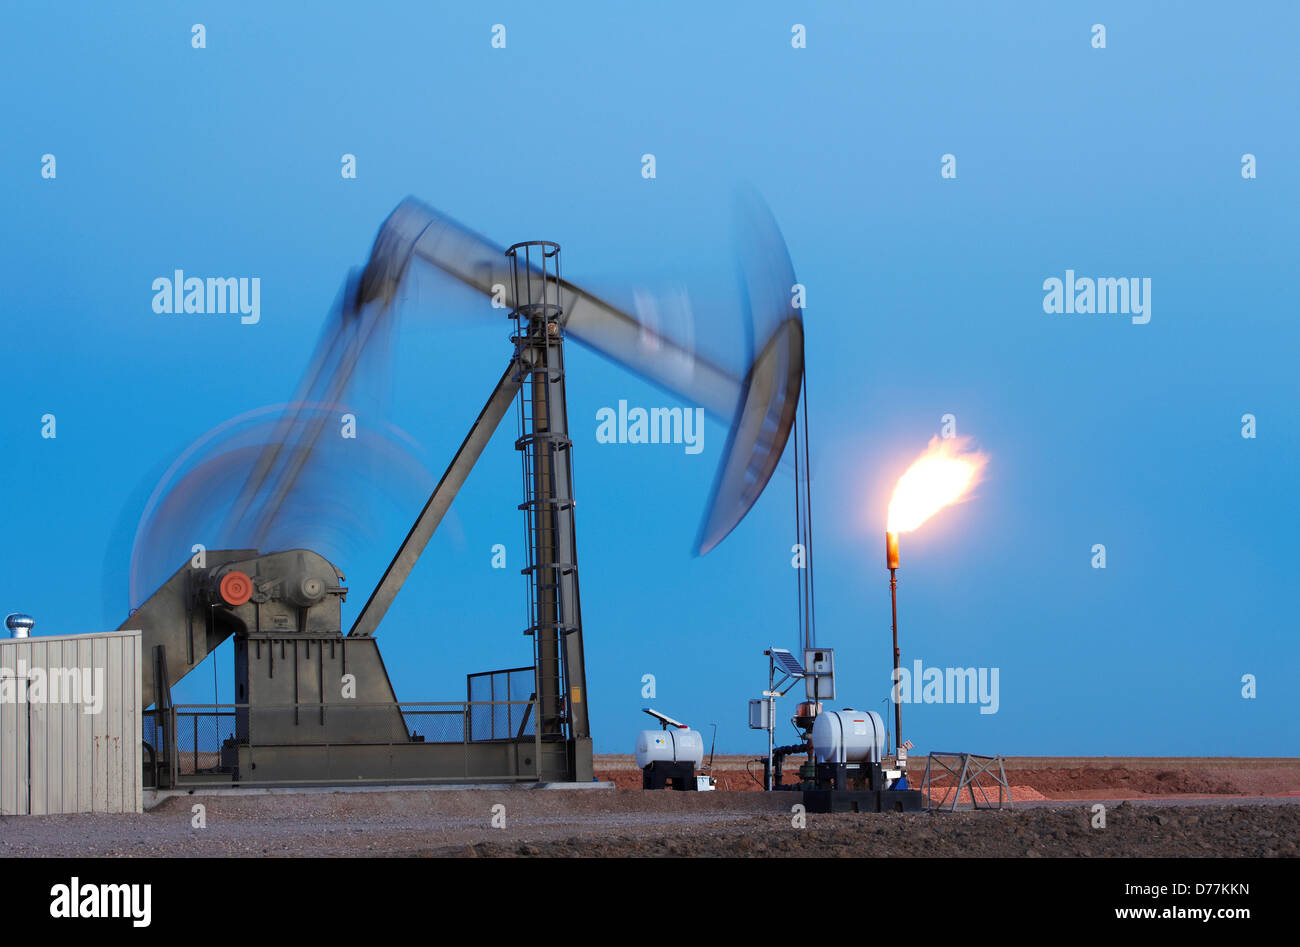 Oil well pumpjack pump jack gas flare flare stack eastern plains Colorado Oil well developed hydraulic fracturing also known as Stock Photo